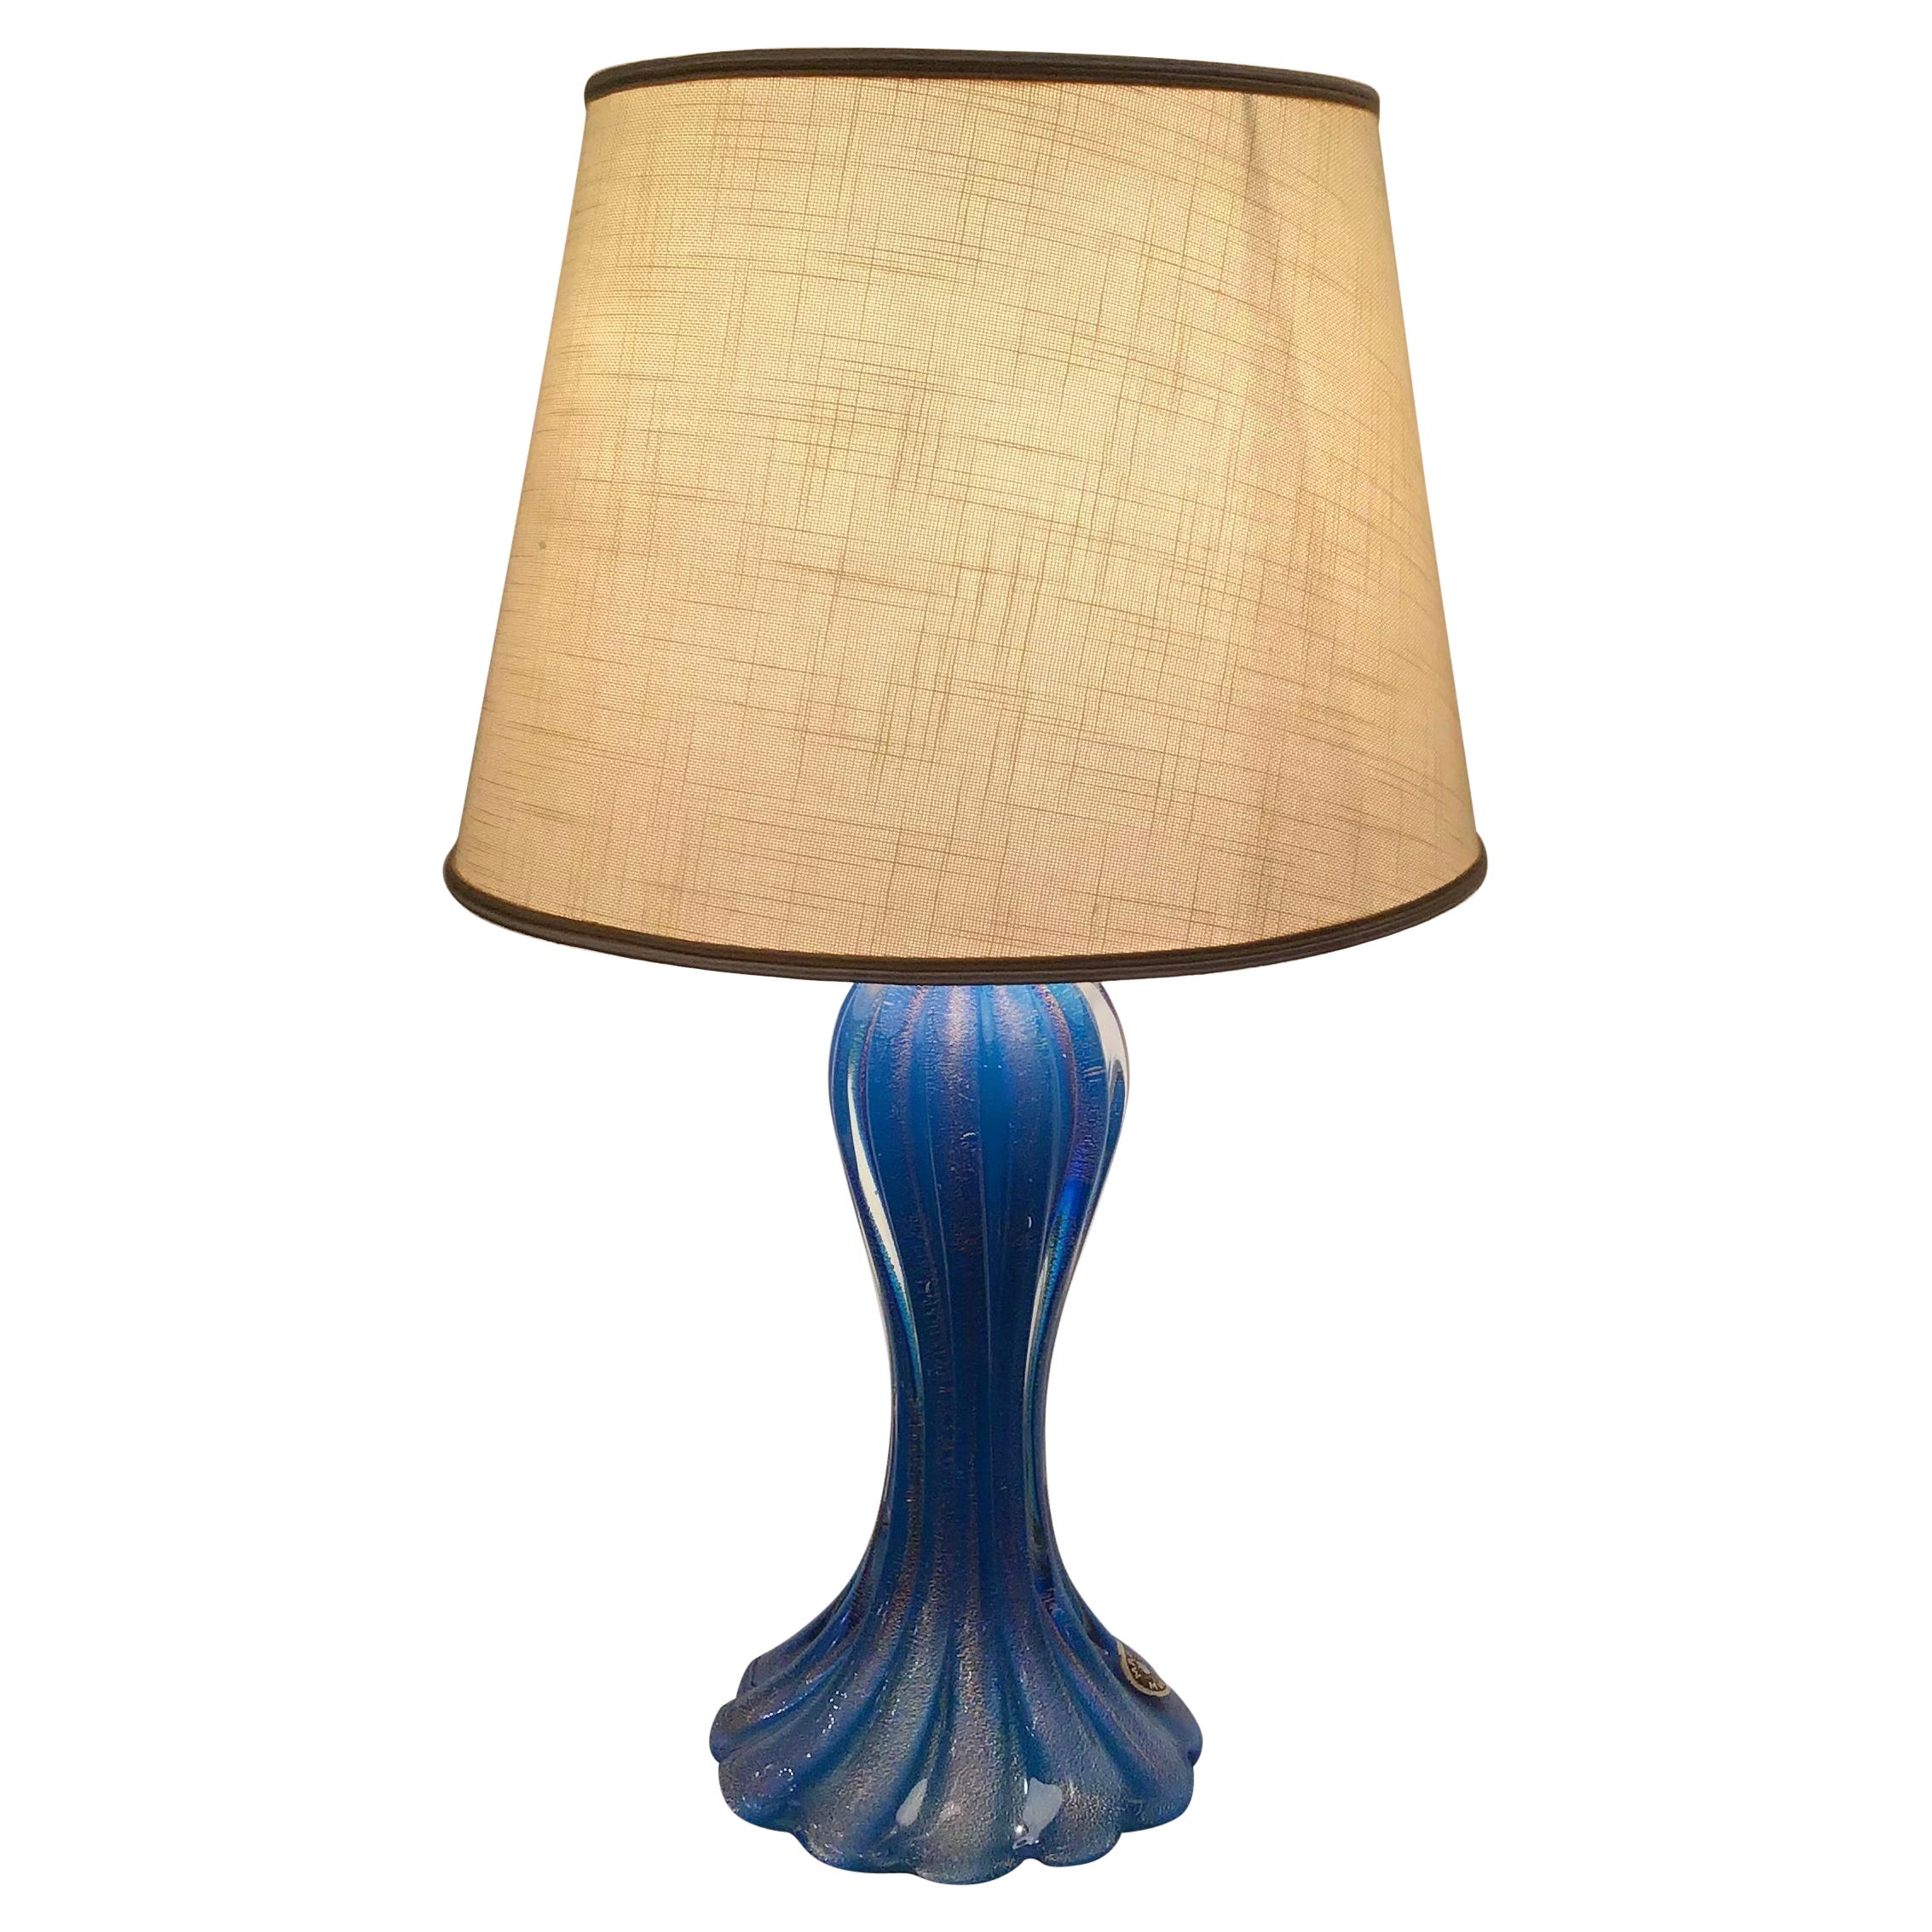 Mazzega Table Lamp Murano Glass Metal 1950 Italy For Sale